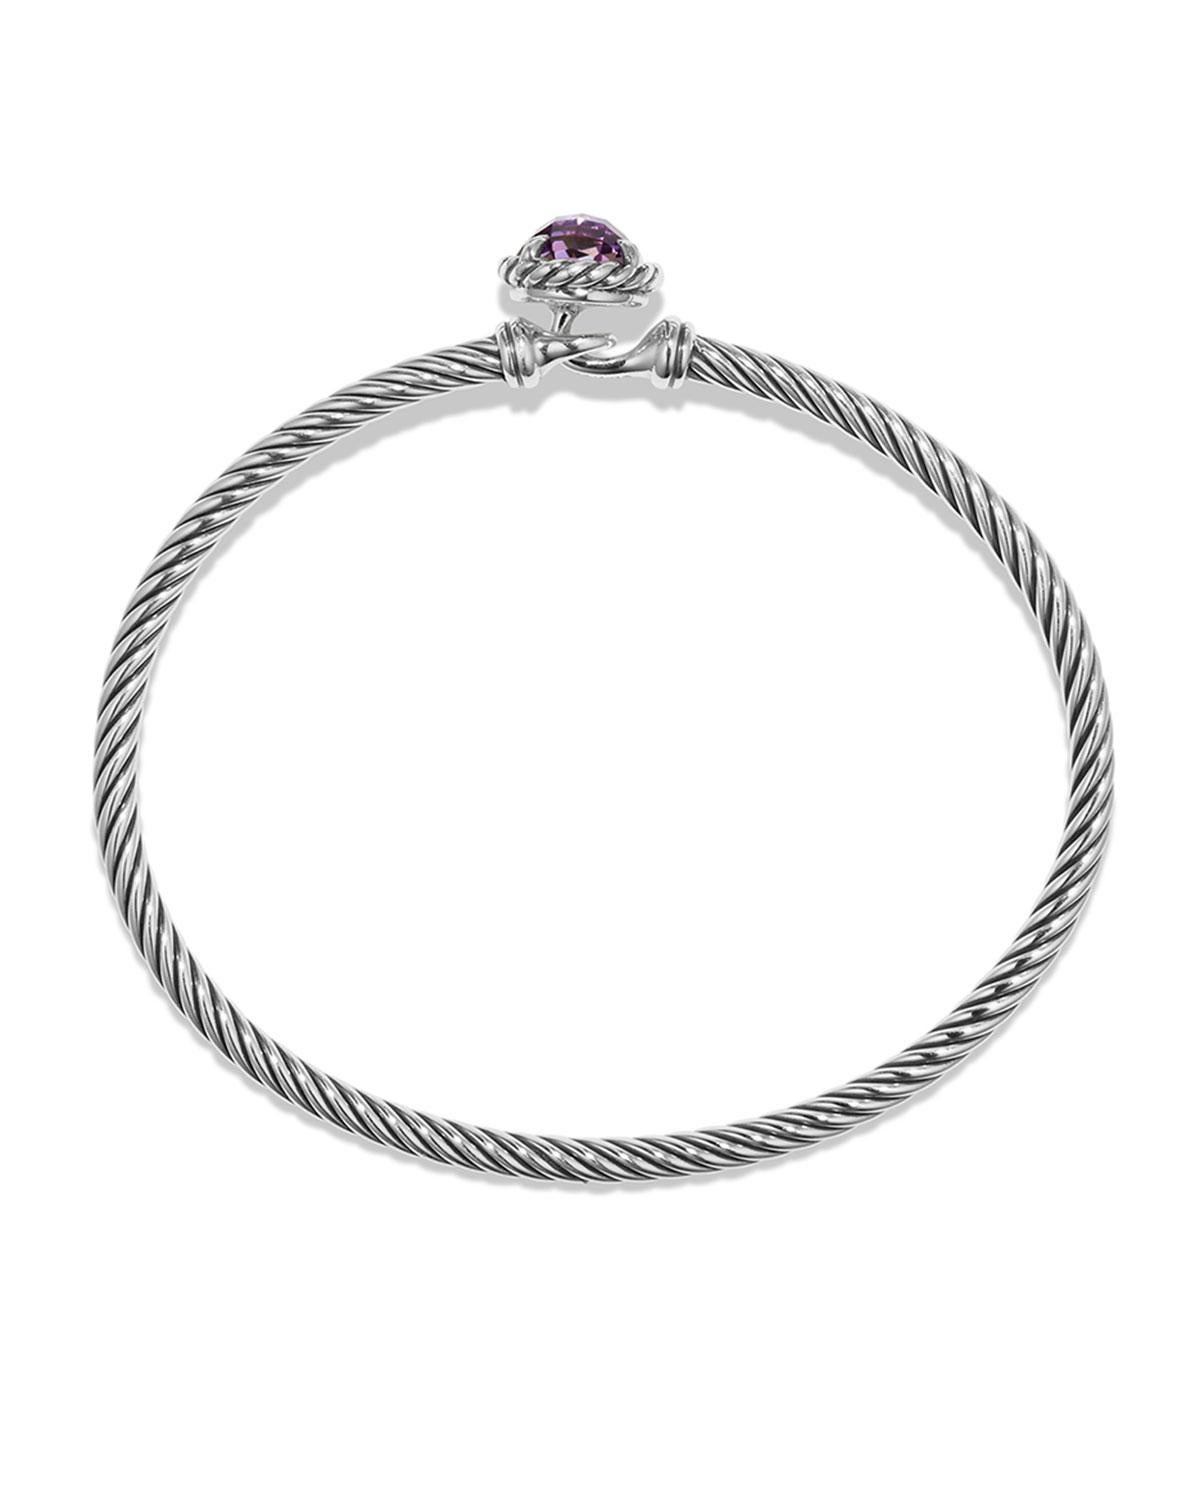 Touch of style, value, and greatness, this David Yurman Cable Buckle Bracelet is made with Sterling silver and 14 karat yellow gold accent plating in twisted cable design and it features faceted peridot. It weighs 29.8 grams and it is 5mm wide to